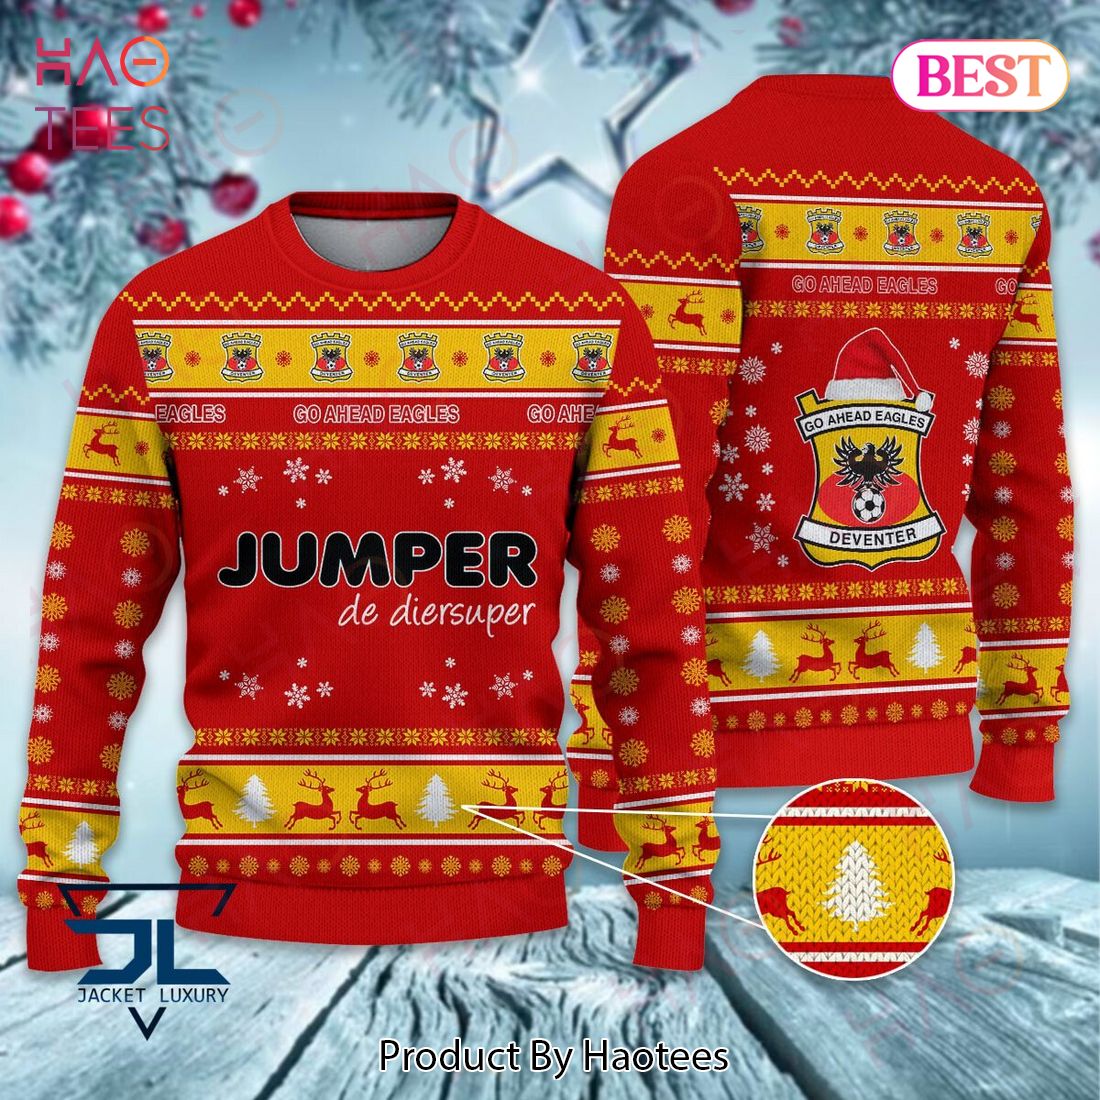 BEST Go Ahead Eagles Jumper Luxury Brand Sweater Limited Edition